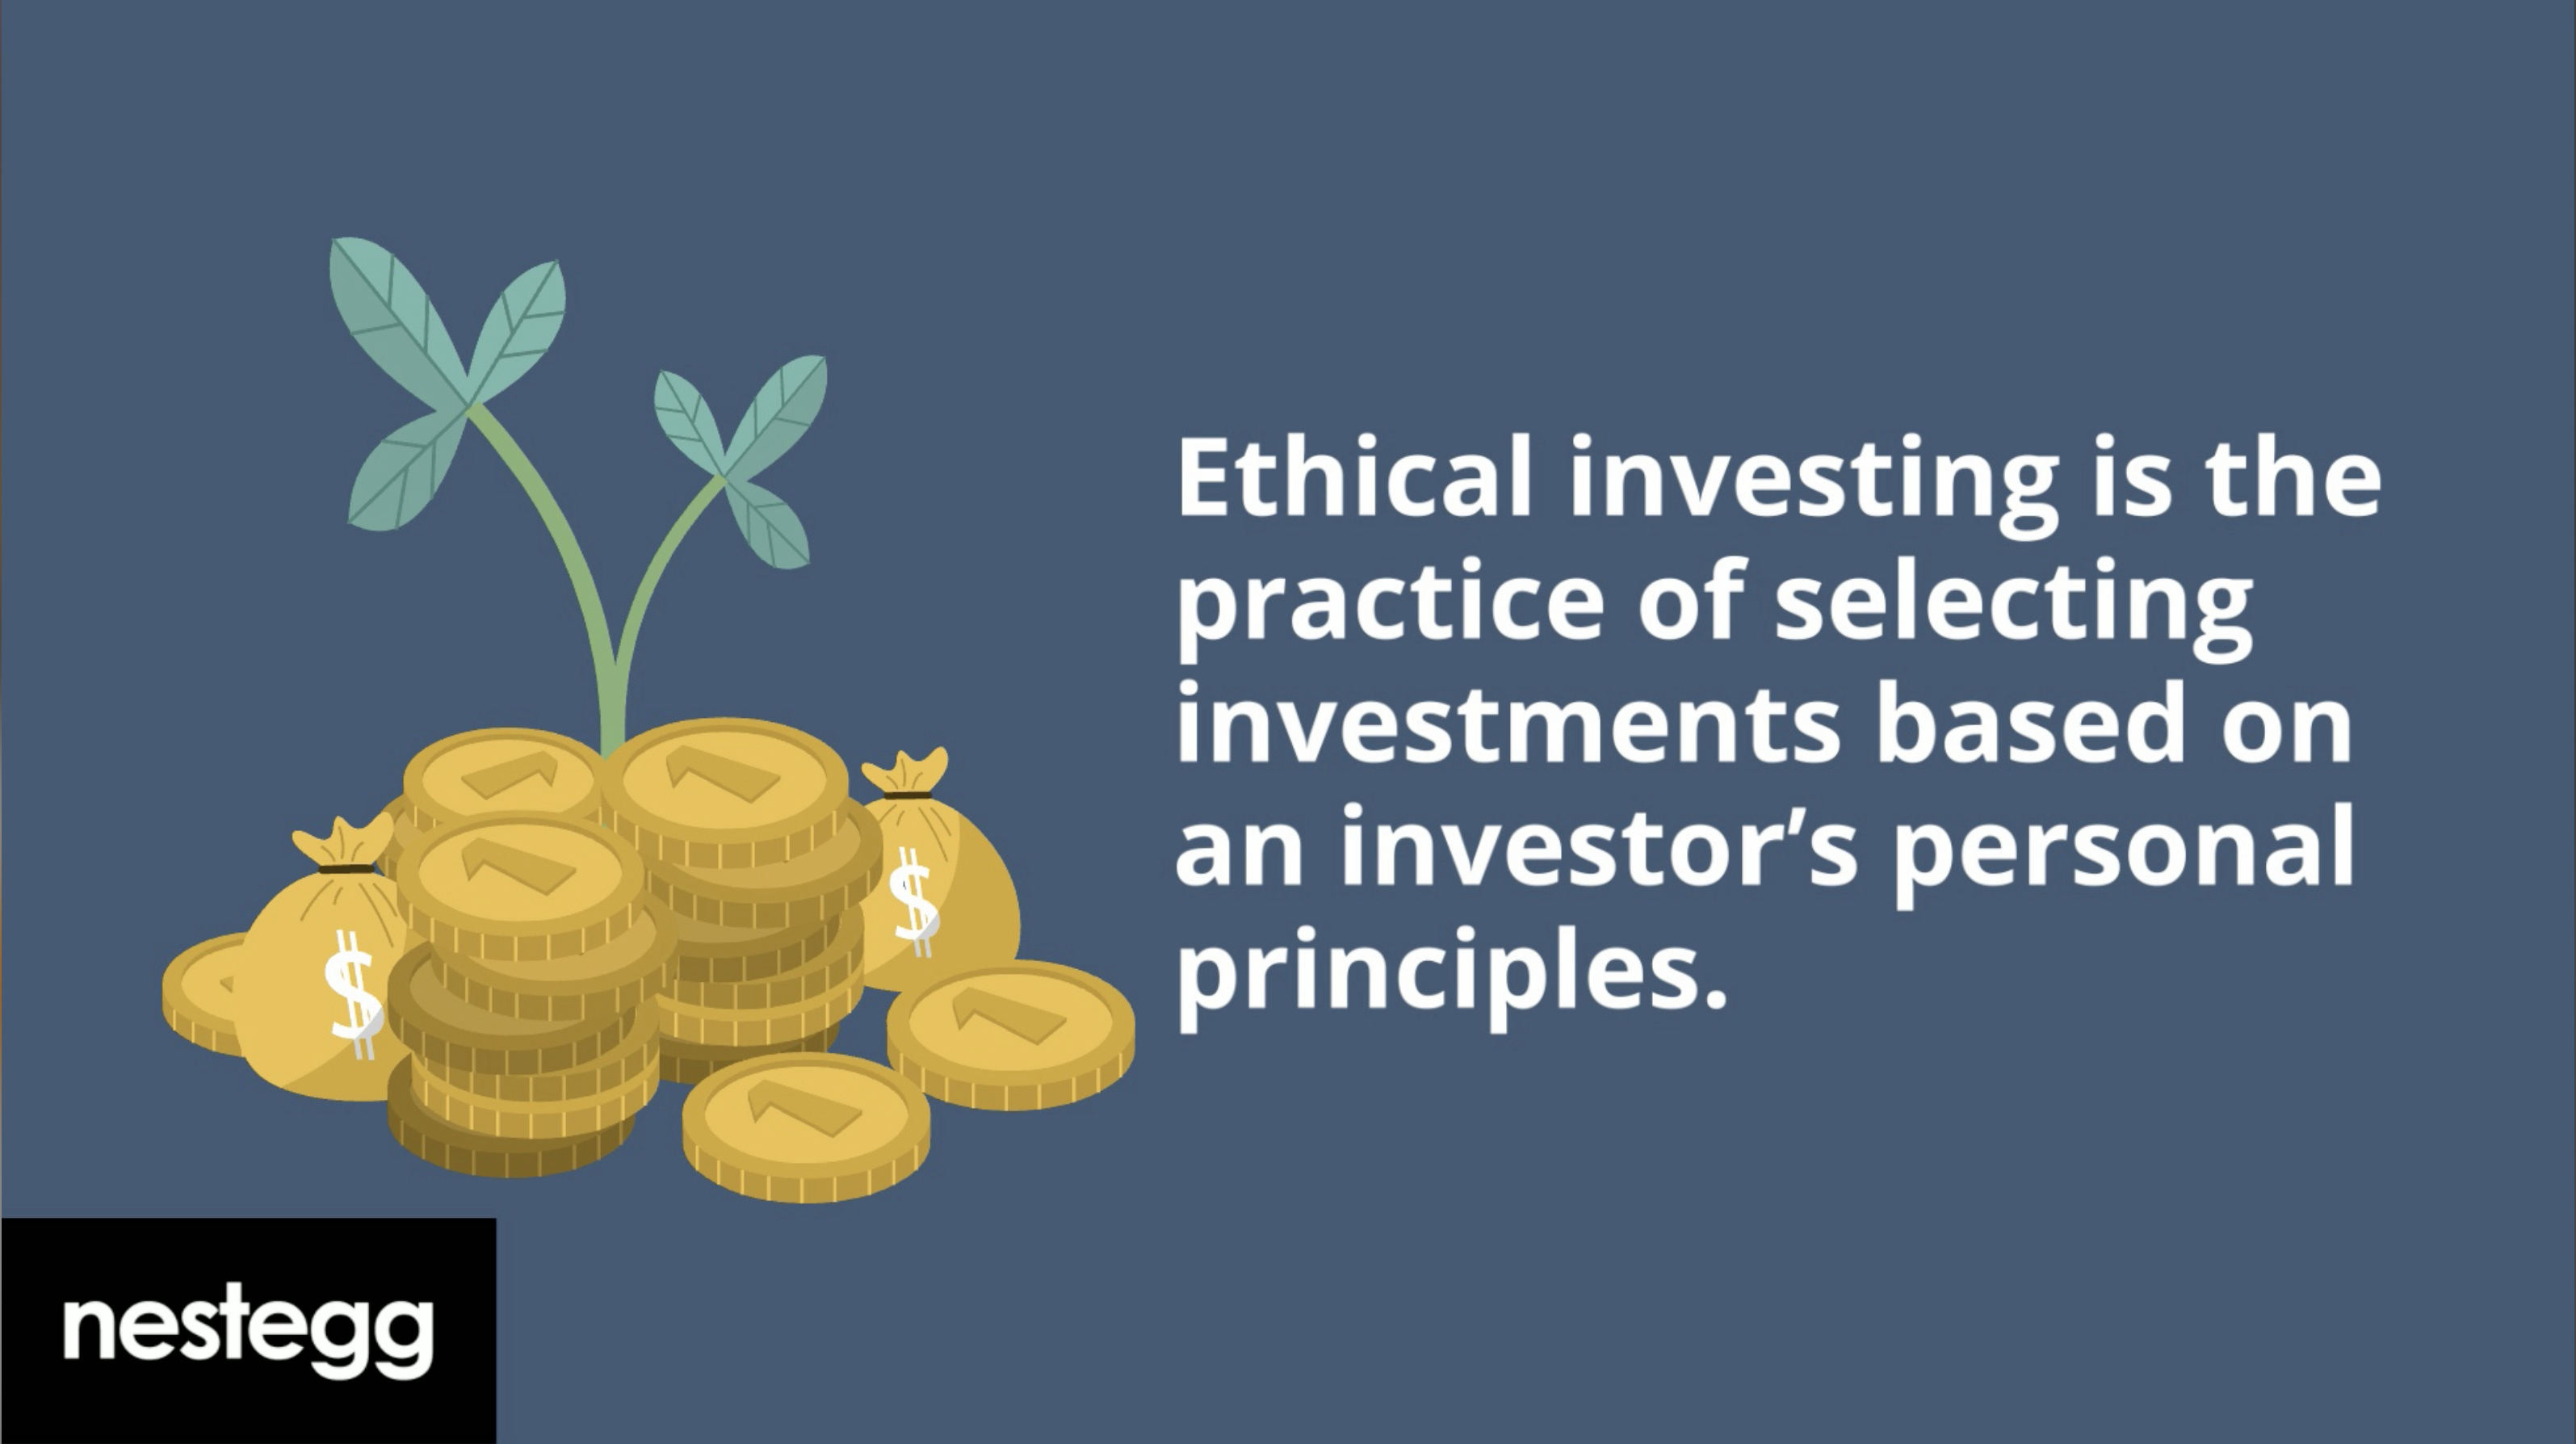 What is ethical investing?